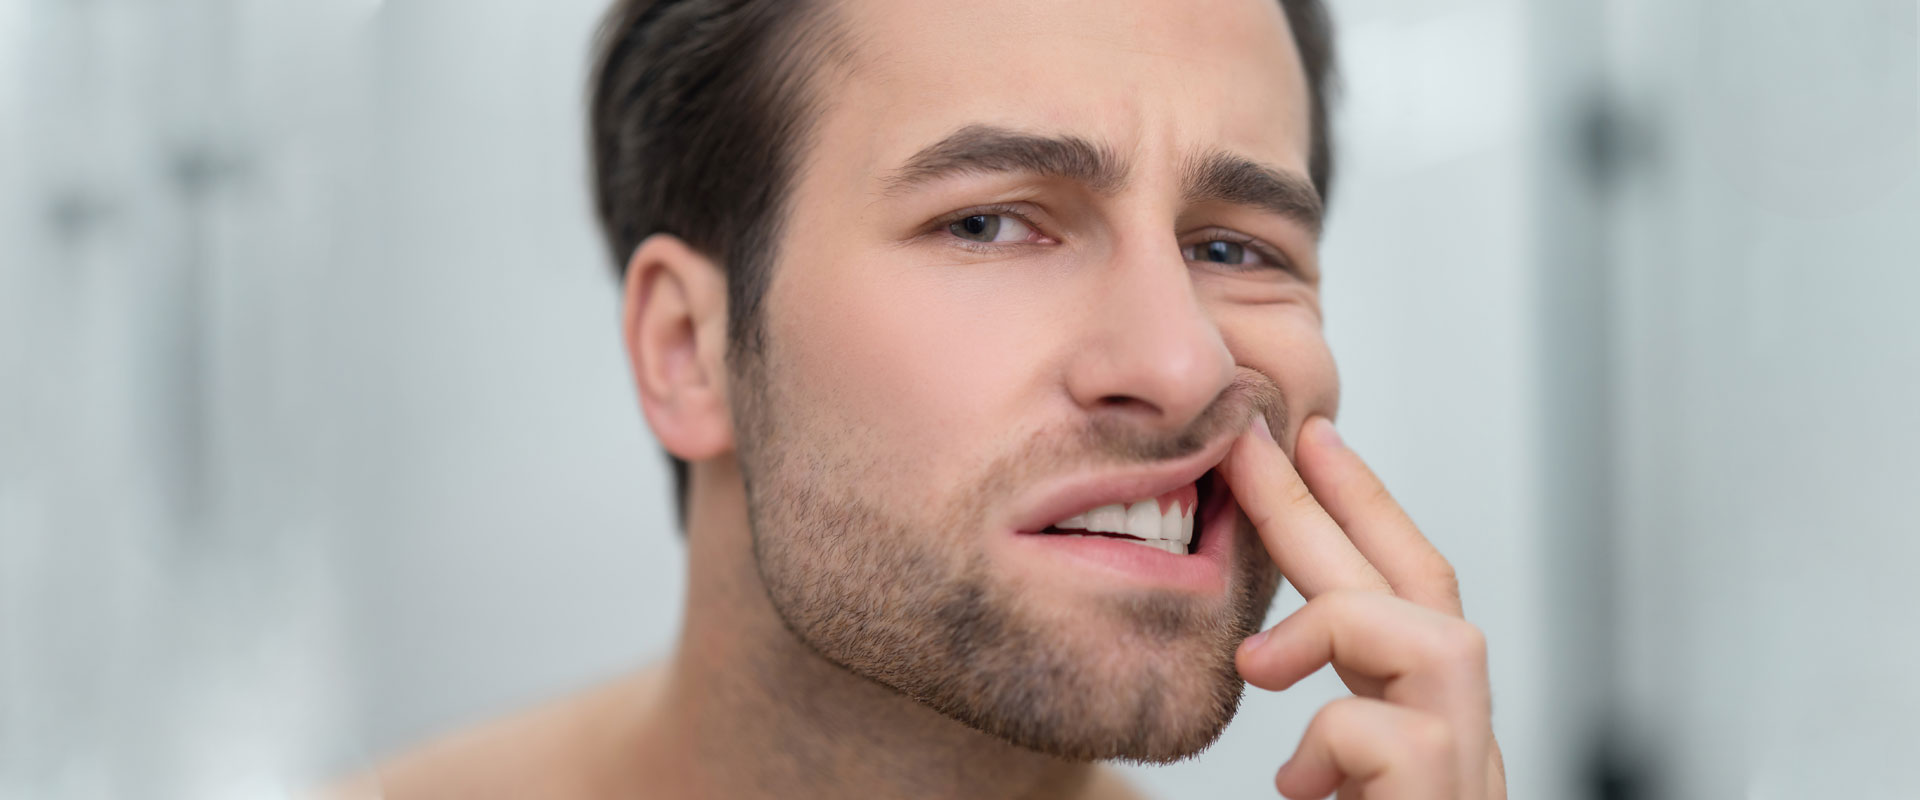 Does Gum Disease Make You Vulnerable to COVID?